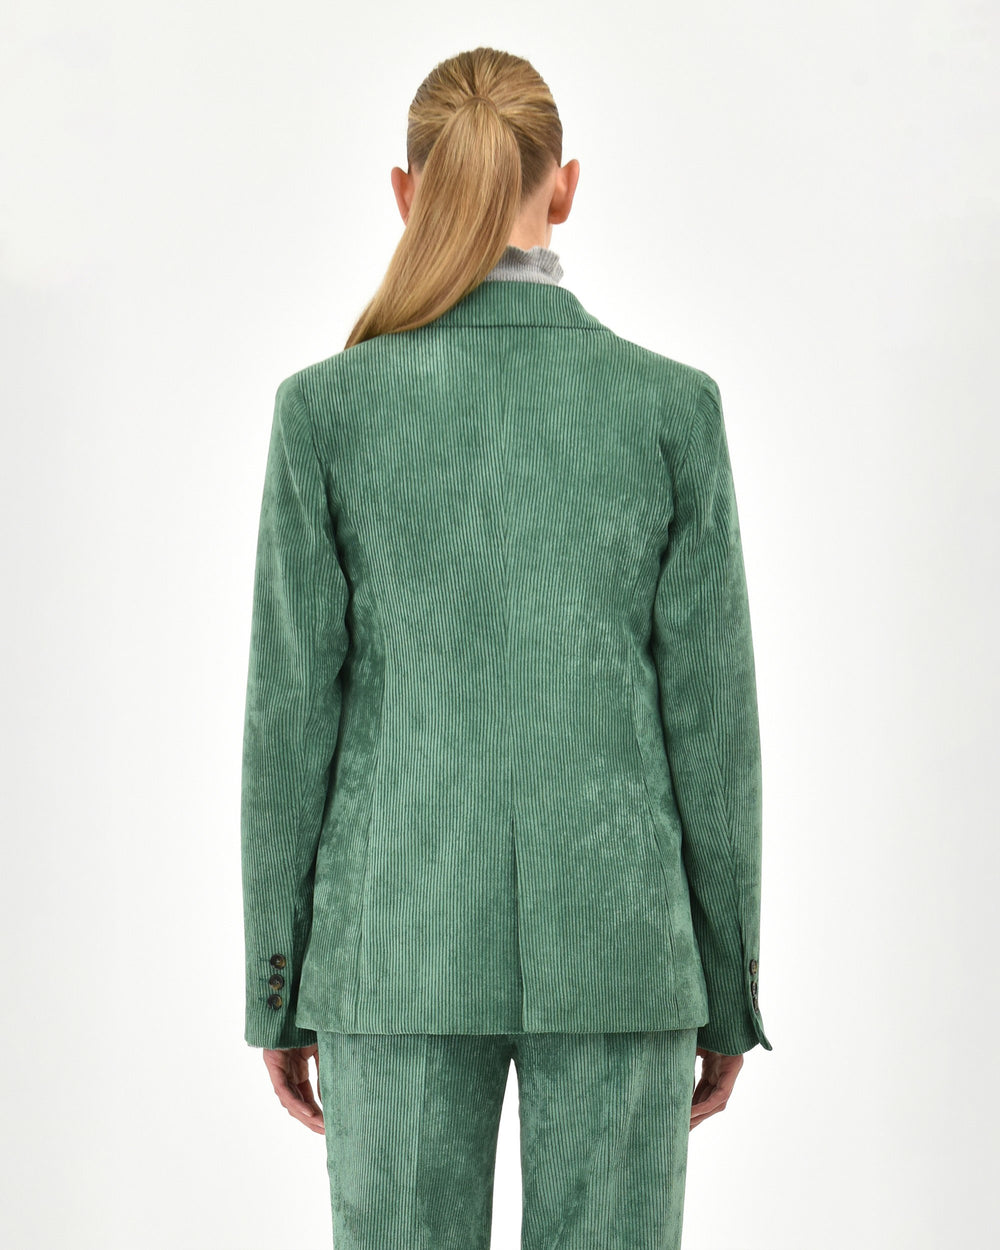 green poly stretch velvet double-breasted blazer